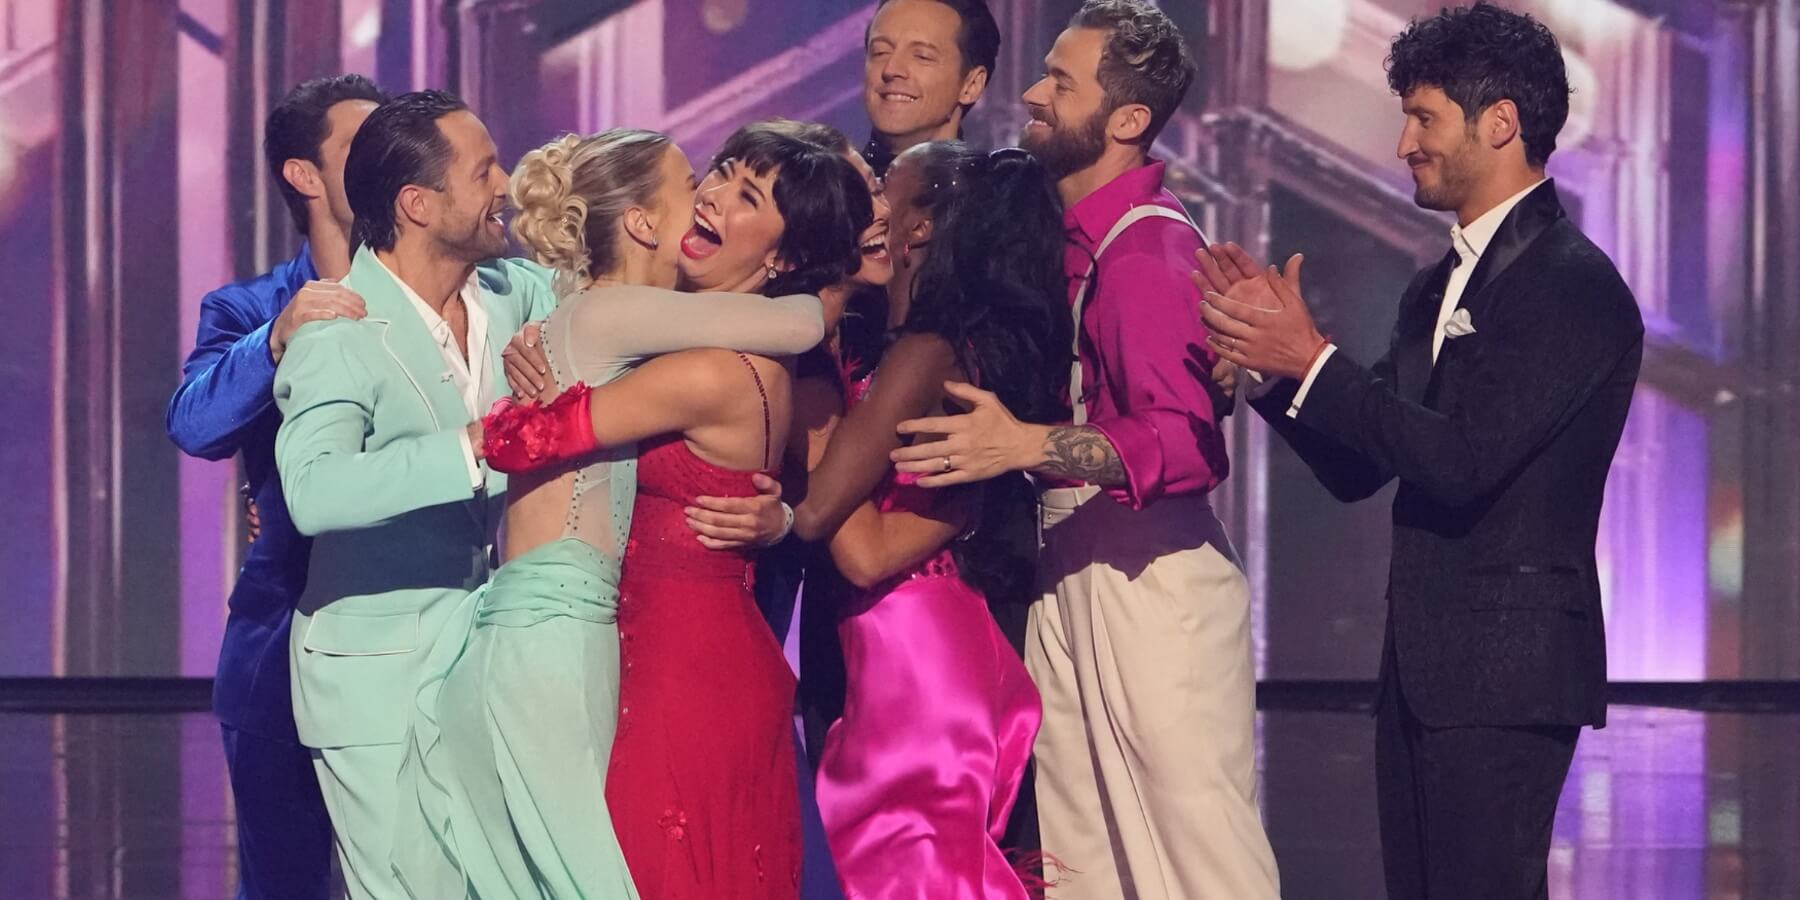 The season 32 finale of 'Dancing with the Stars' features five celebrities vying for a mirrorball trophy.